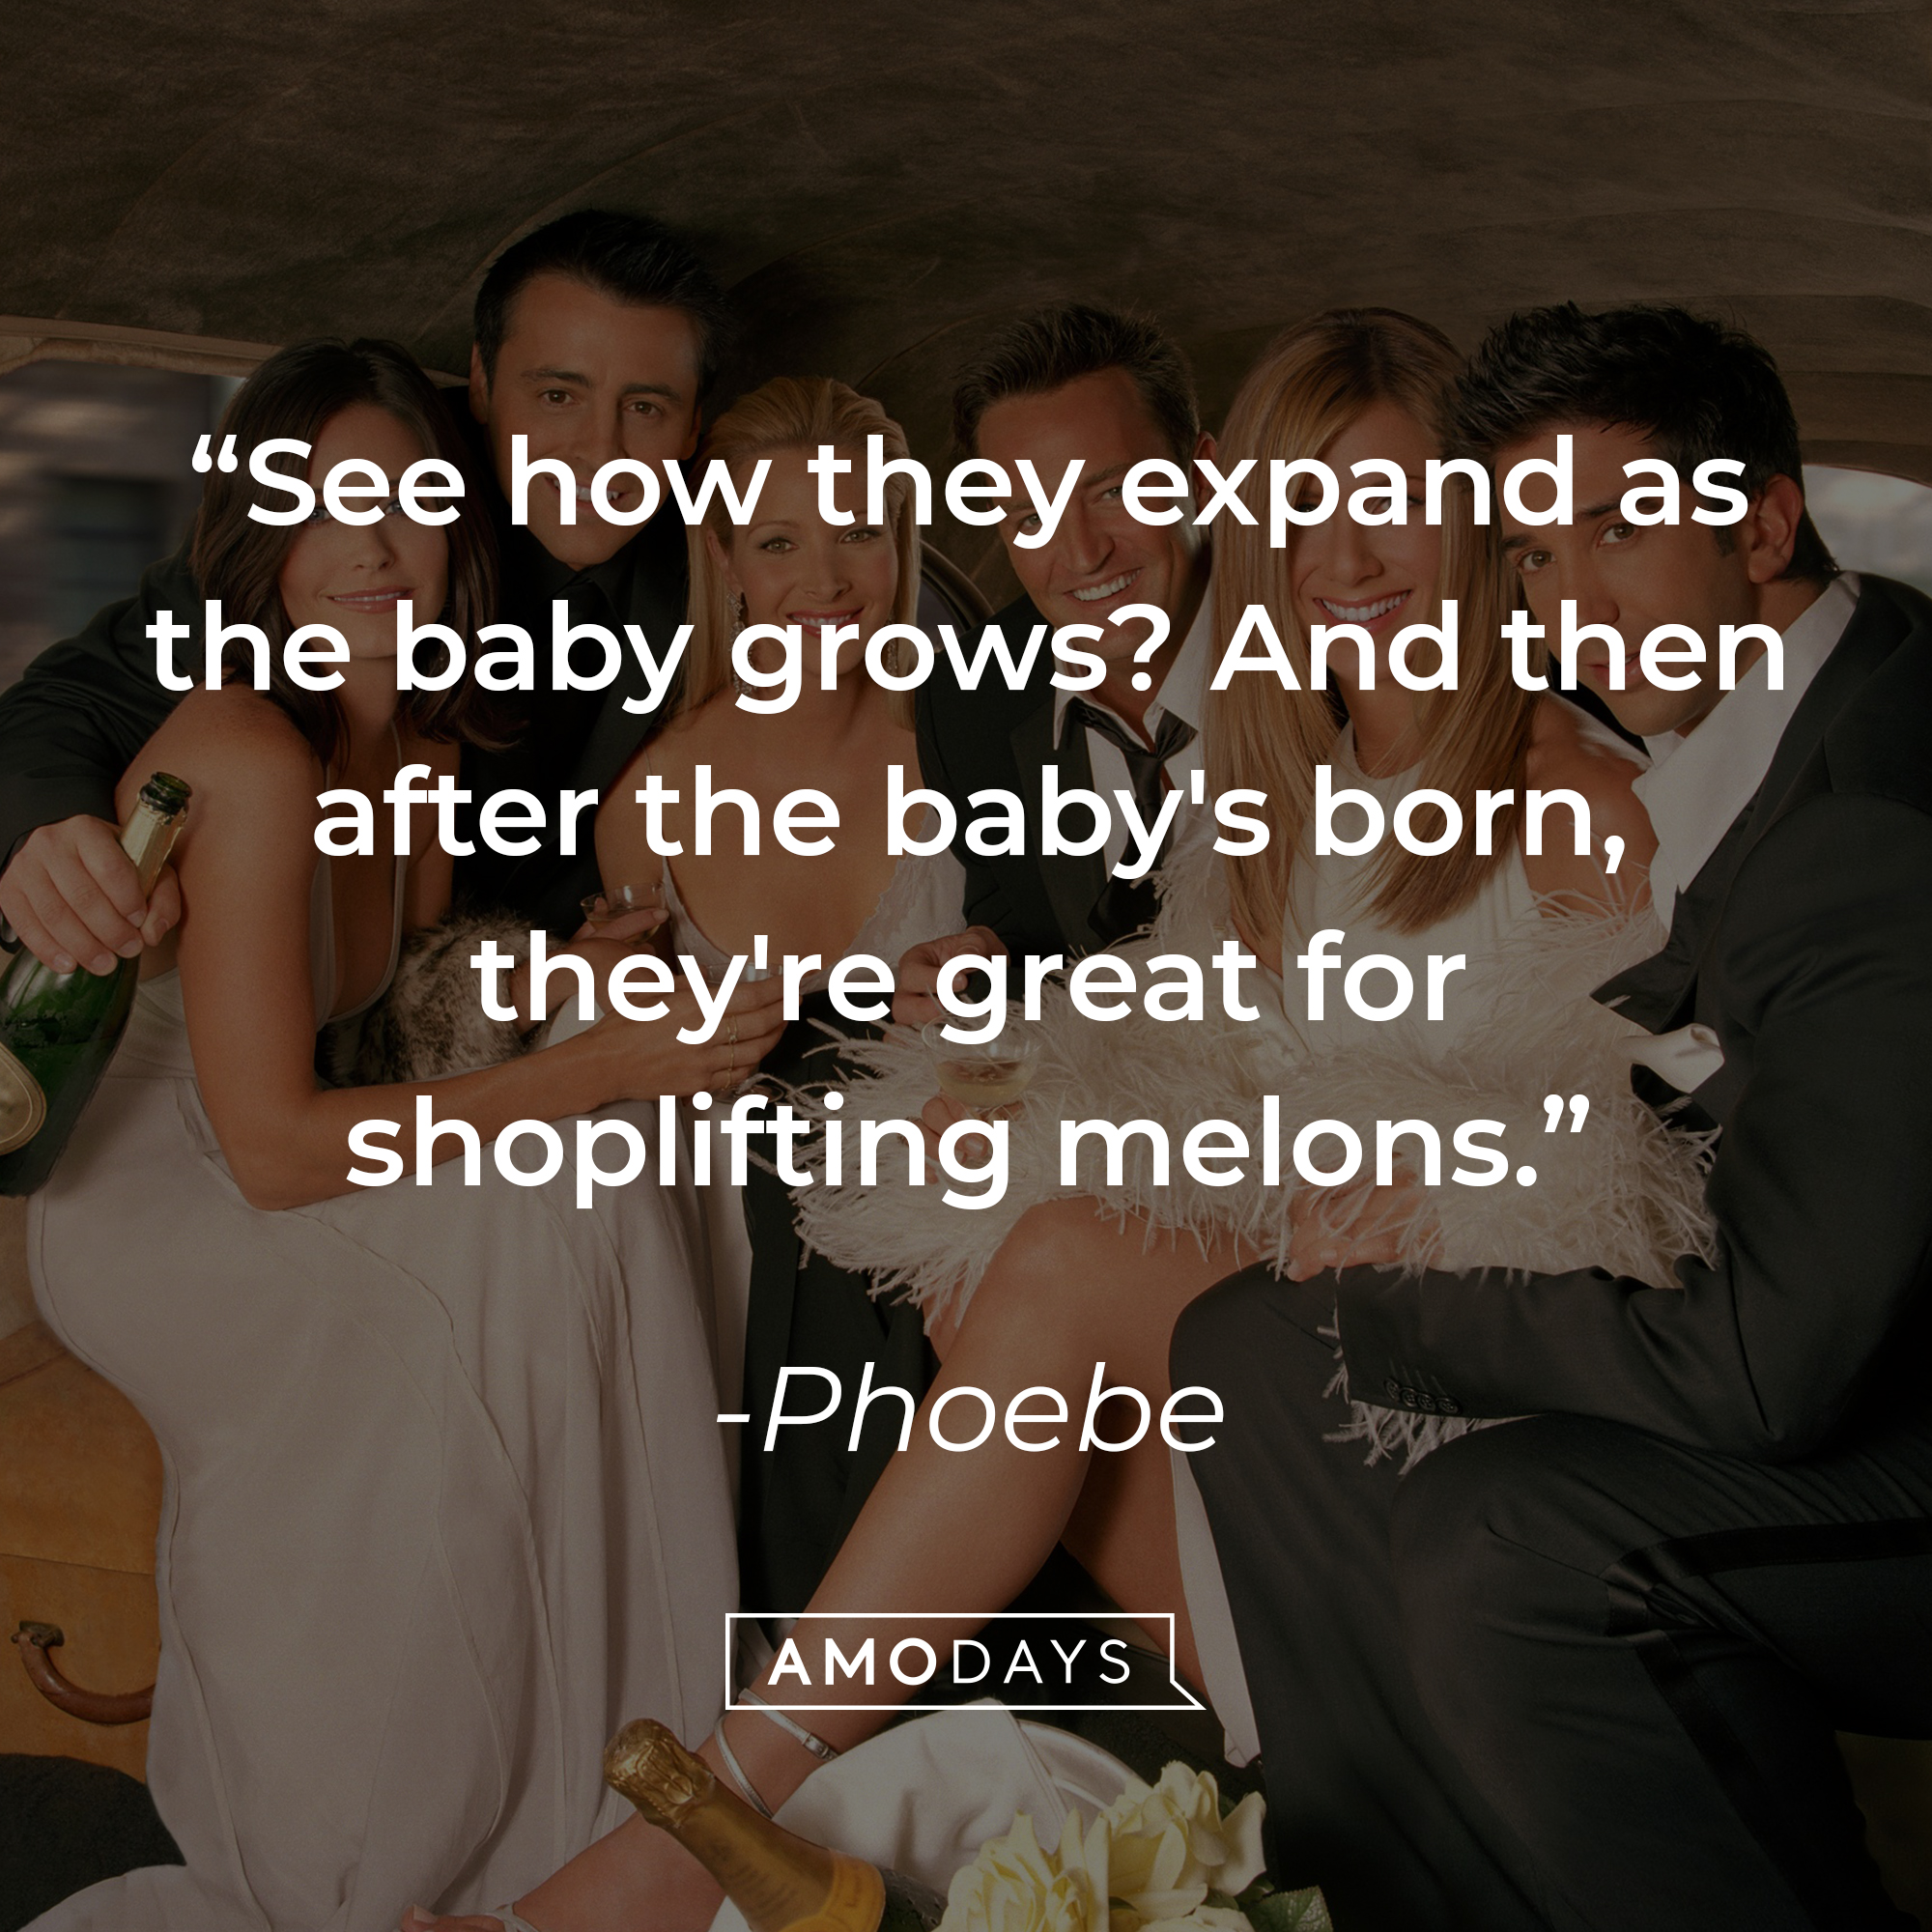 Phoebe's quote: "See how they expand as the baby grows? And then after the baby's born, they're great for shoplifting melons." | Source: Facebook.com/friends.tv